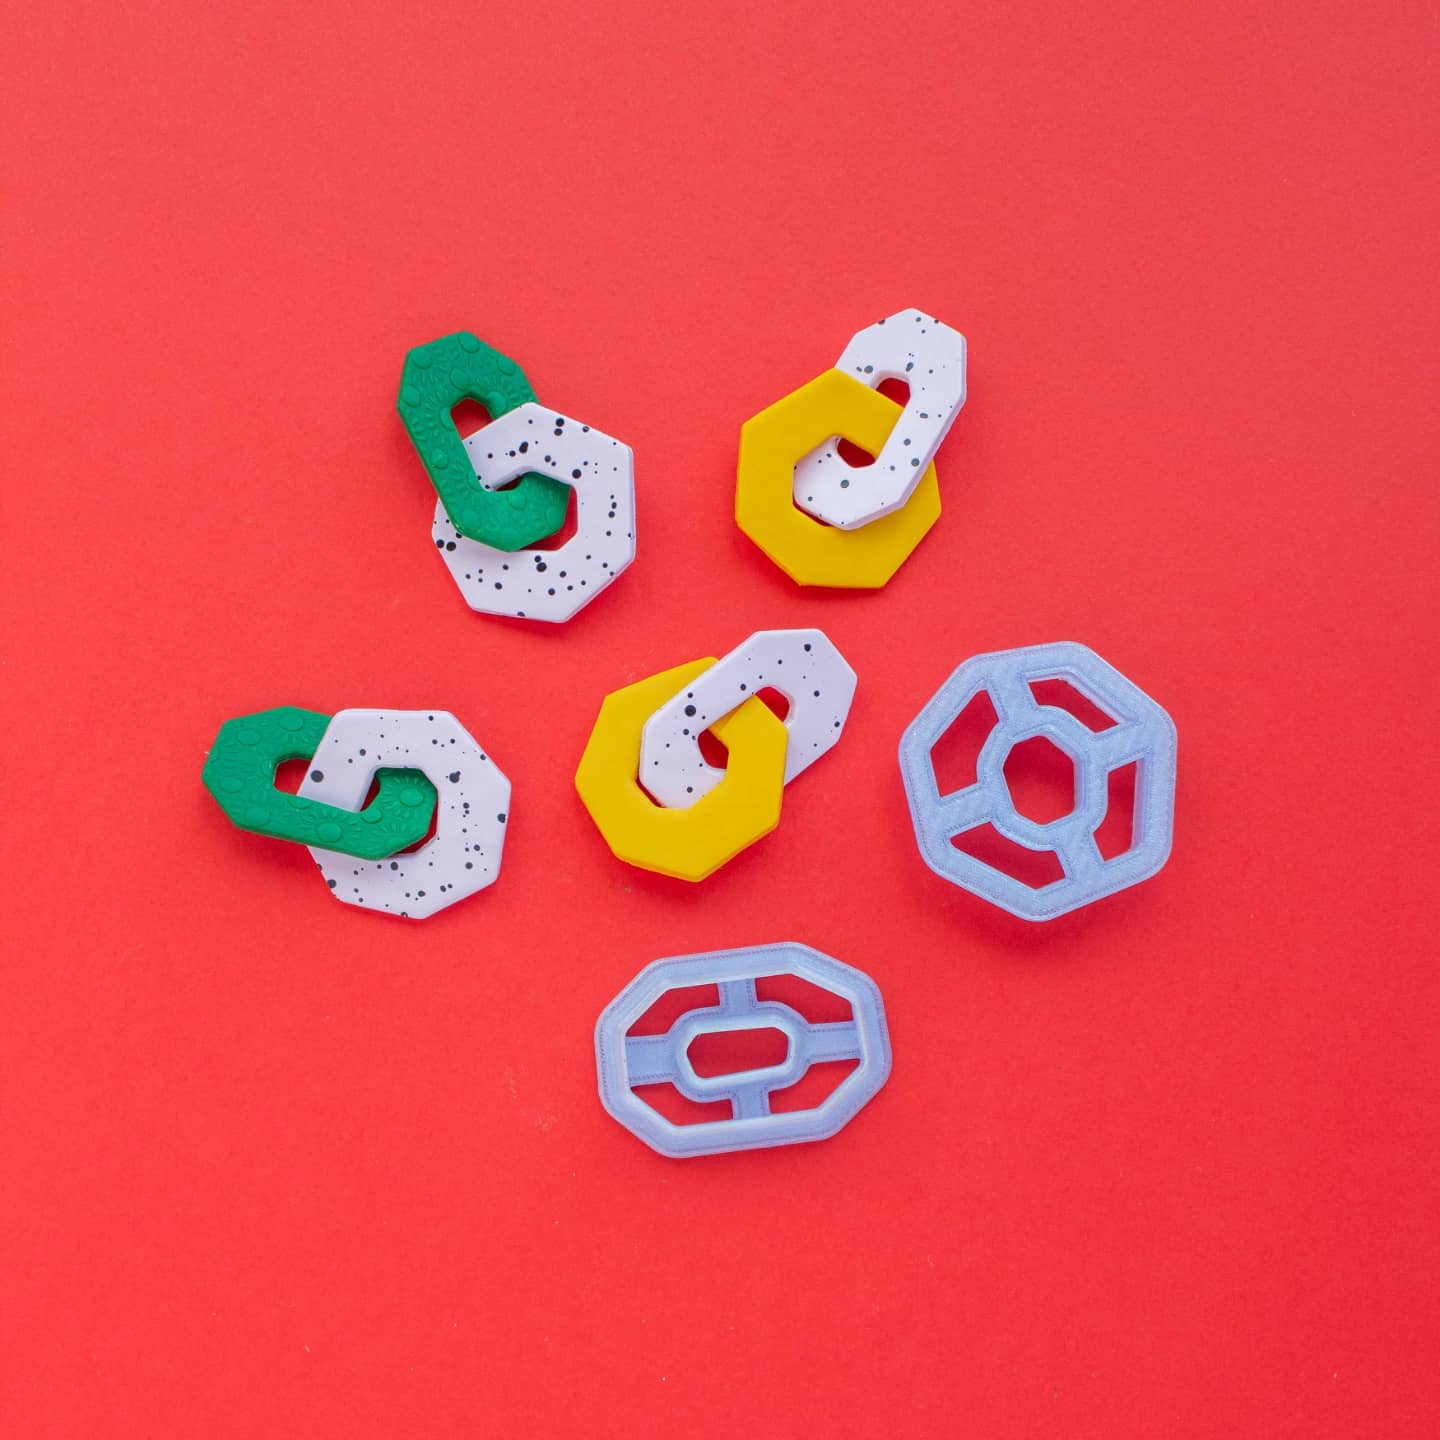 Two organic shaped clay cutters, one oval and one square, and two pairs of link earring on a red background